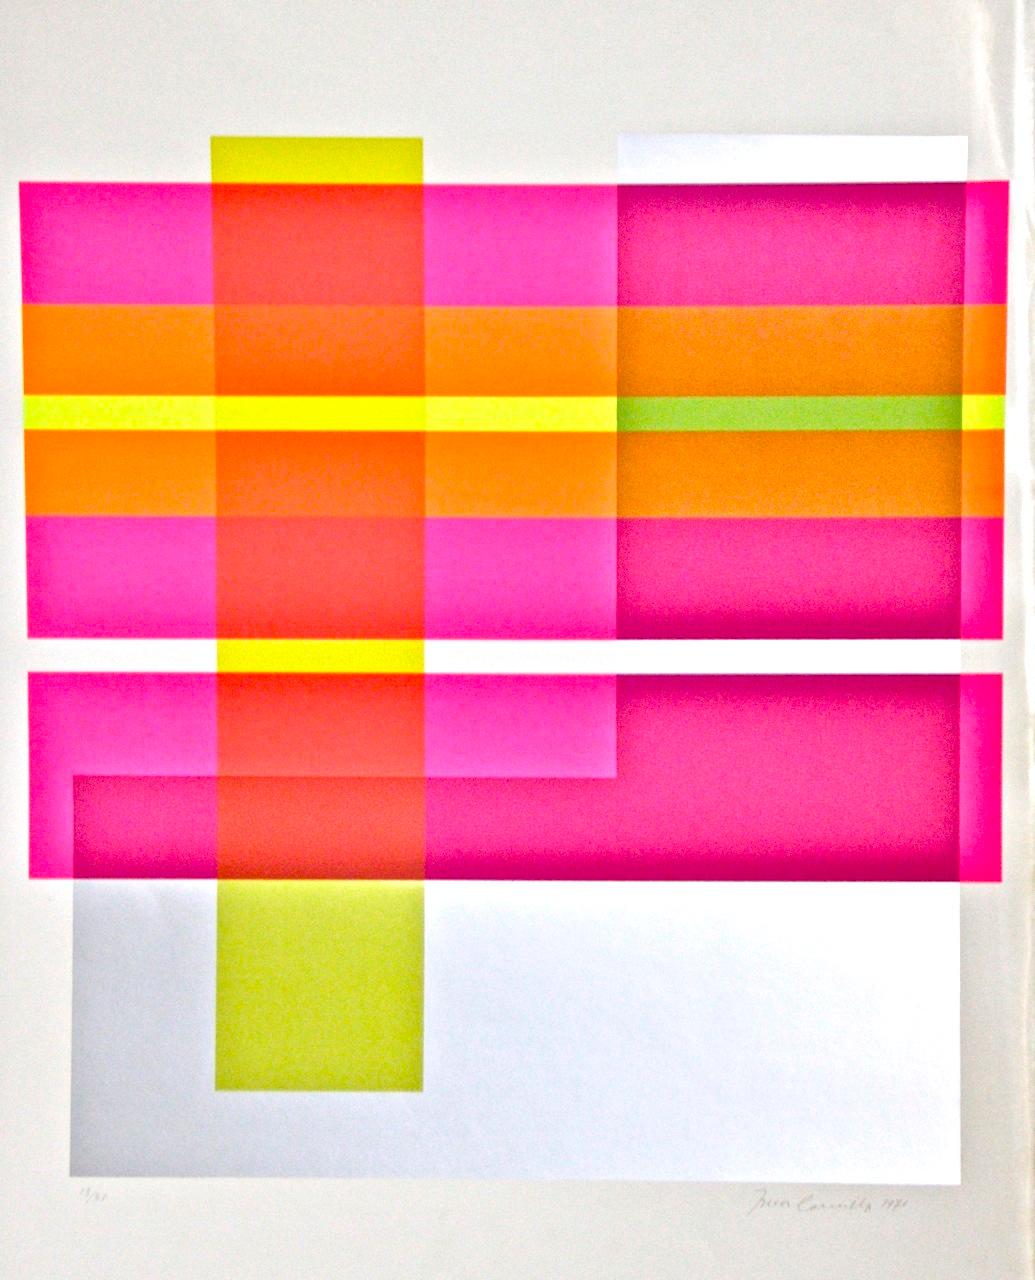 Composition  is an original serigraph realized by Franco Cannilla in 1971.

The artwork is hand-signed in pen by the artist. Edition of 50 prints.

The serigraph is from the print suite "Structures", a rare portfolio realized by Cannilla in the